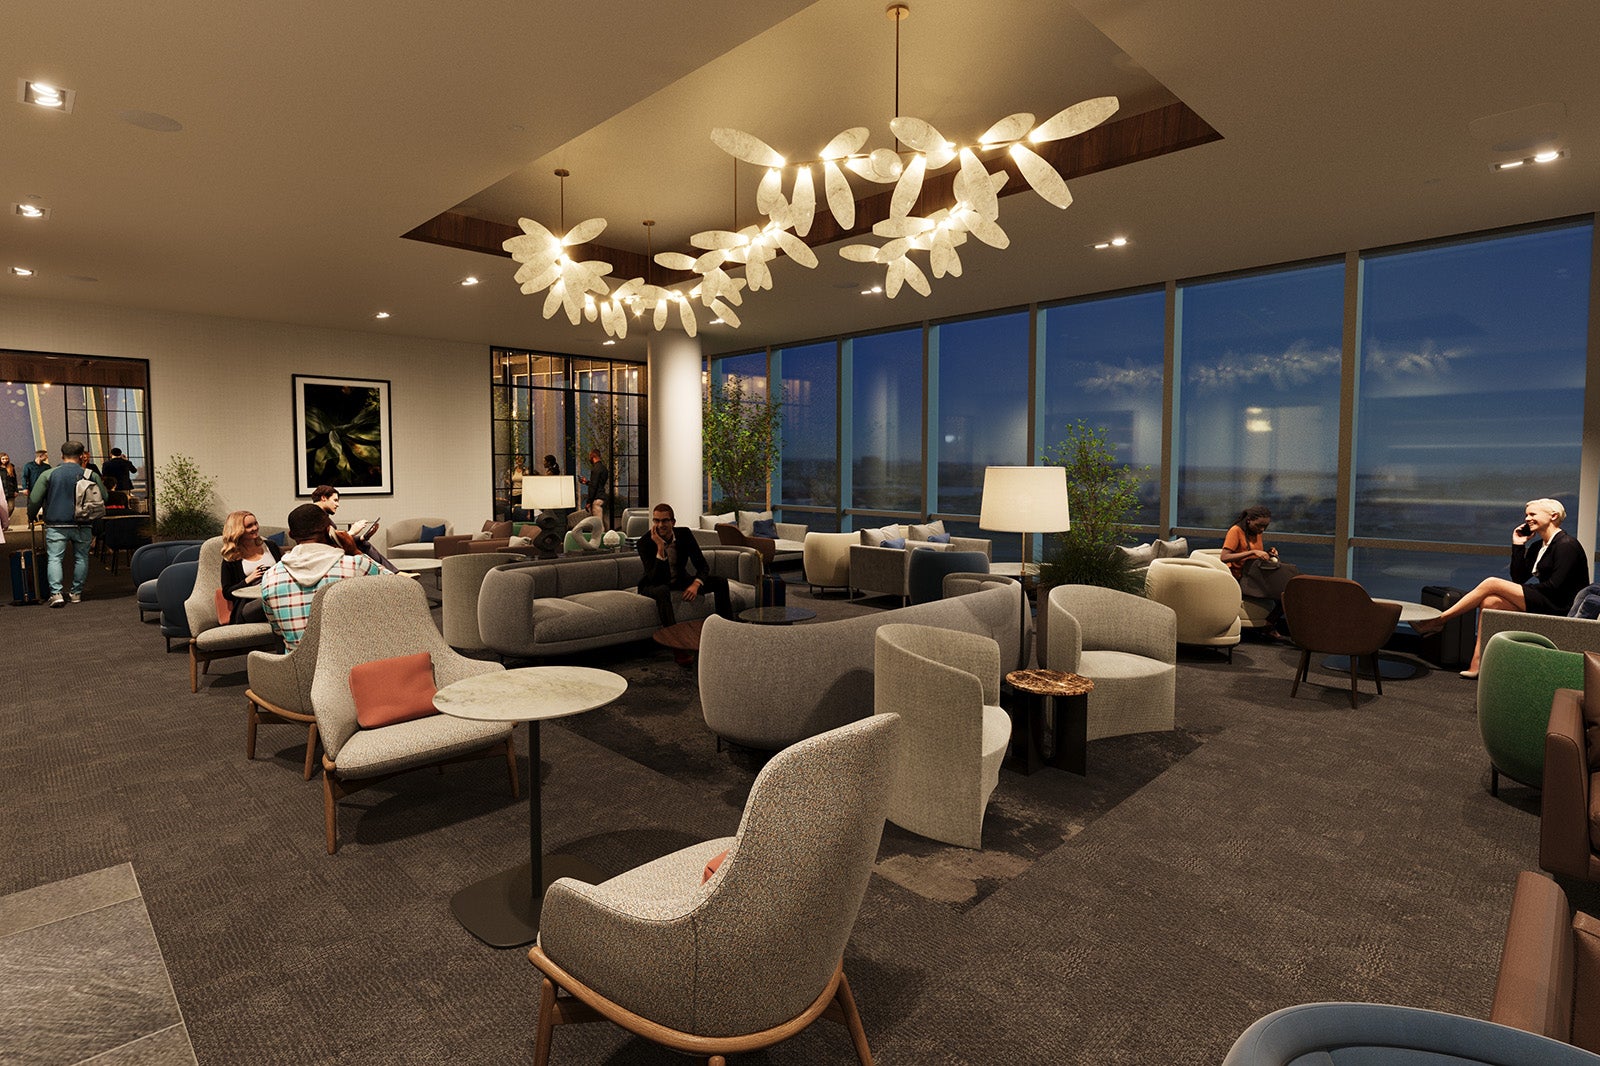 New details: Amex will open a Centurion Lounge in Newark Airport